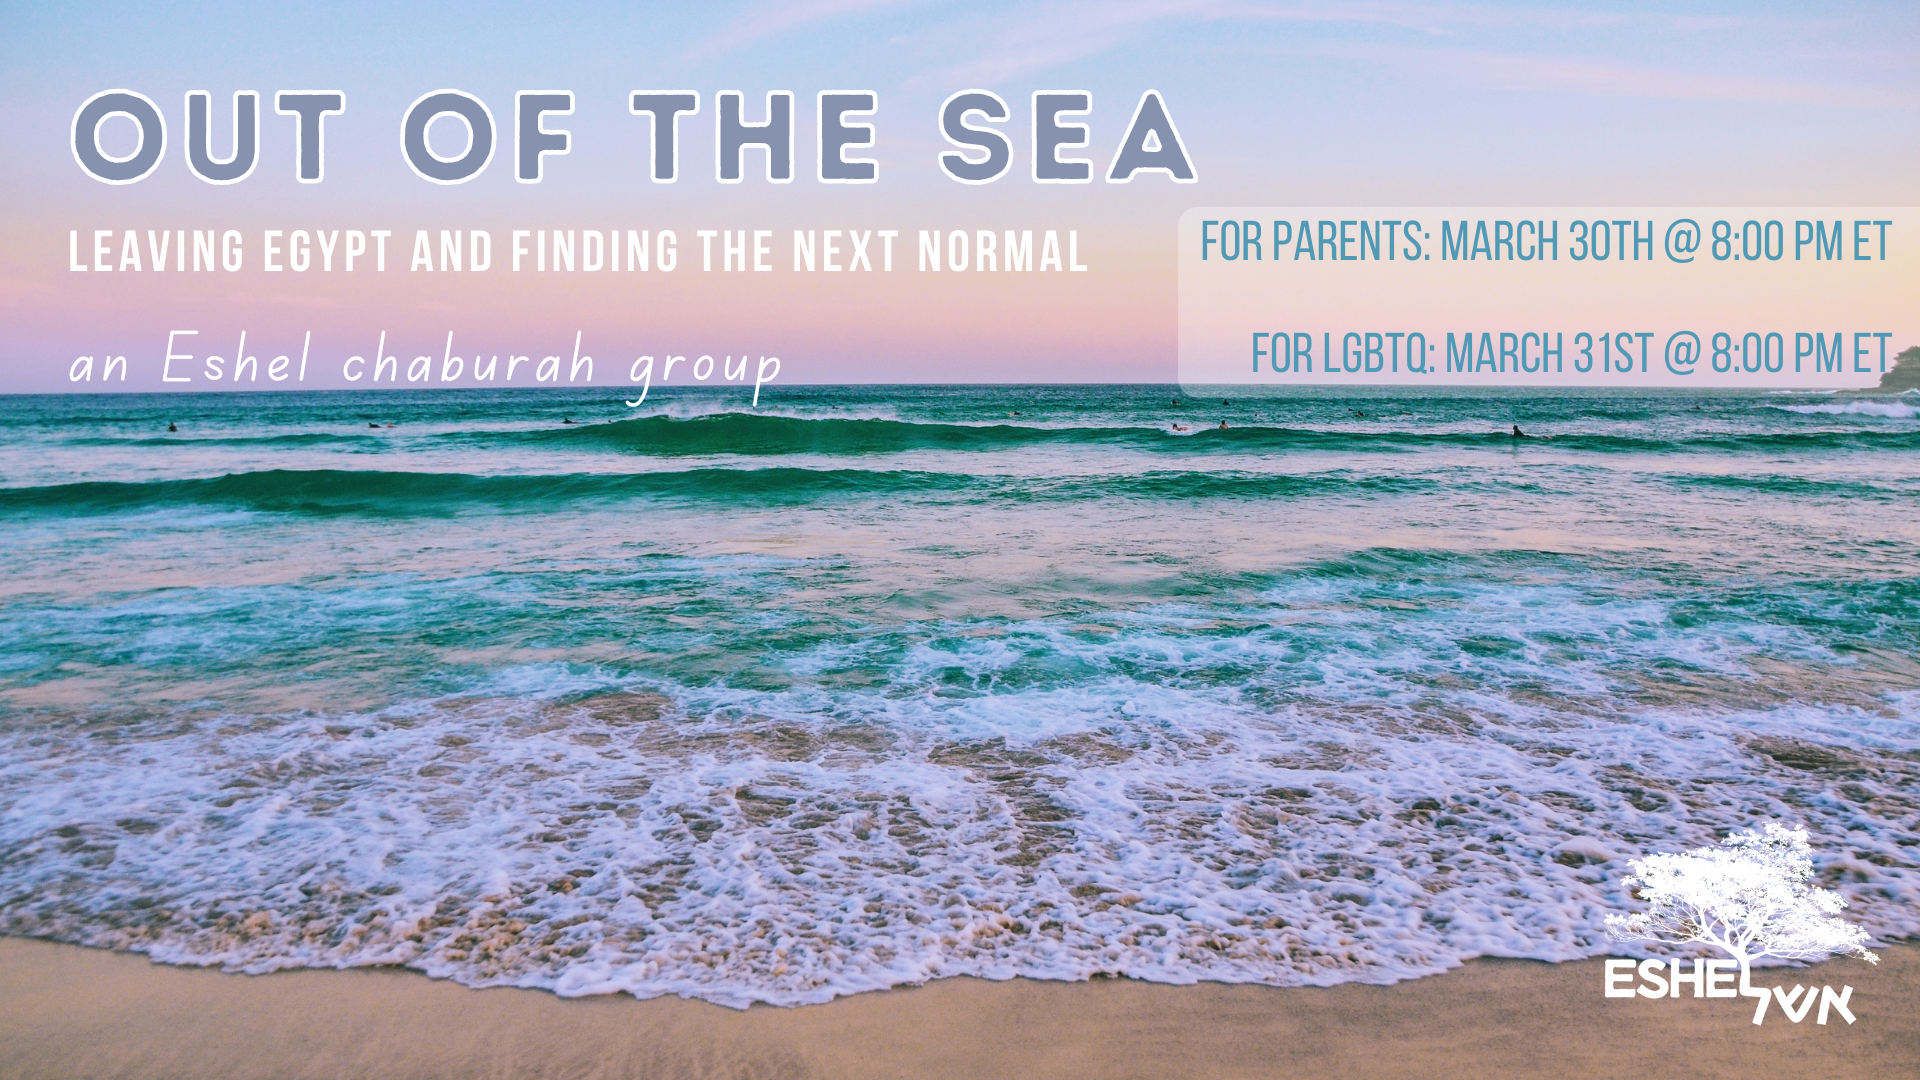 Out of The Sea: Leaving Egypt and Finding the Next Normal | an Eshel chaburah group | For Parents: March 30th @ 8:00 PM ET | For LGBTQ: March 31st @ 8:00 PM ET